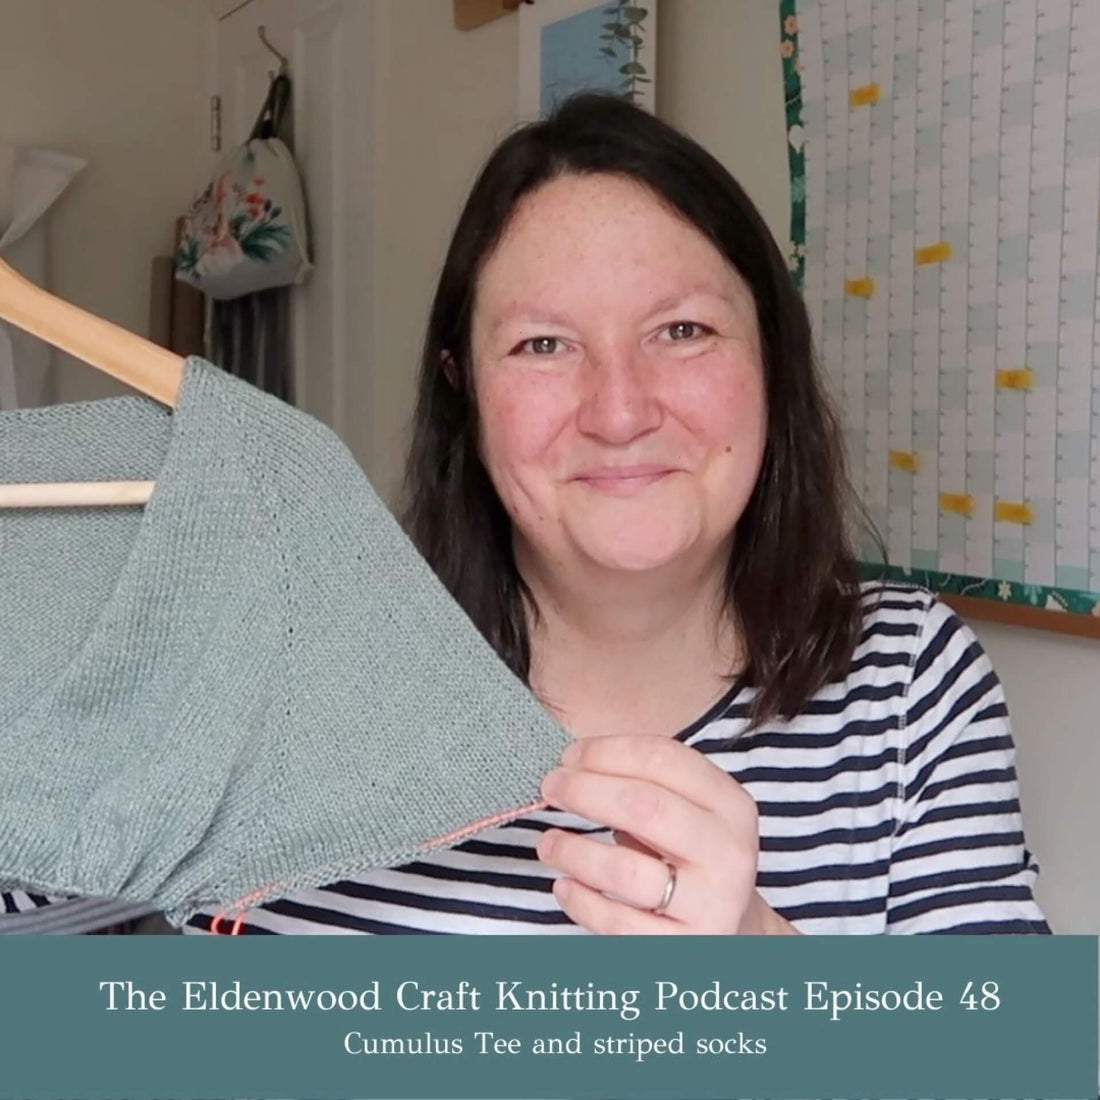 Emma, the presenter of the Eldenwood Craft Knitting Podcast on YouTube, shows off her partially knitted Cumulus Tee. She is wearing a blue and white striped top.